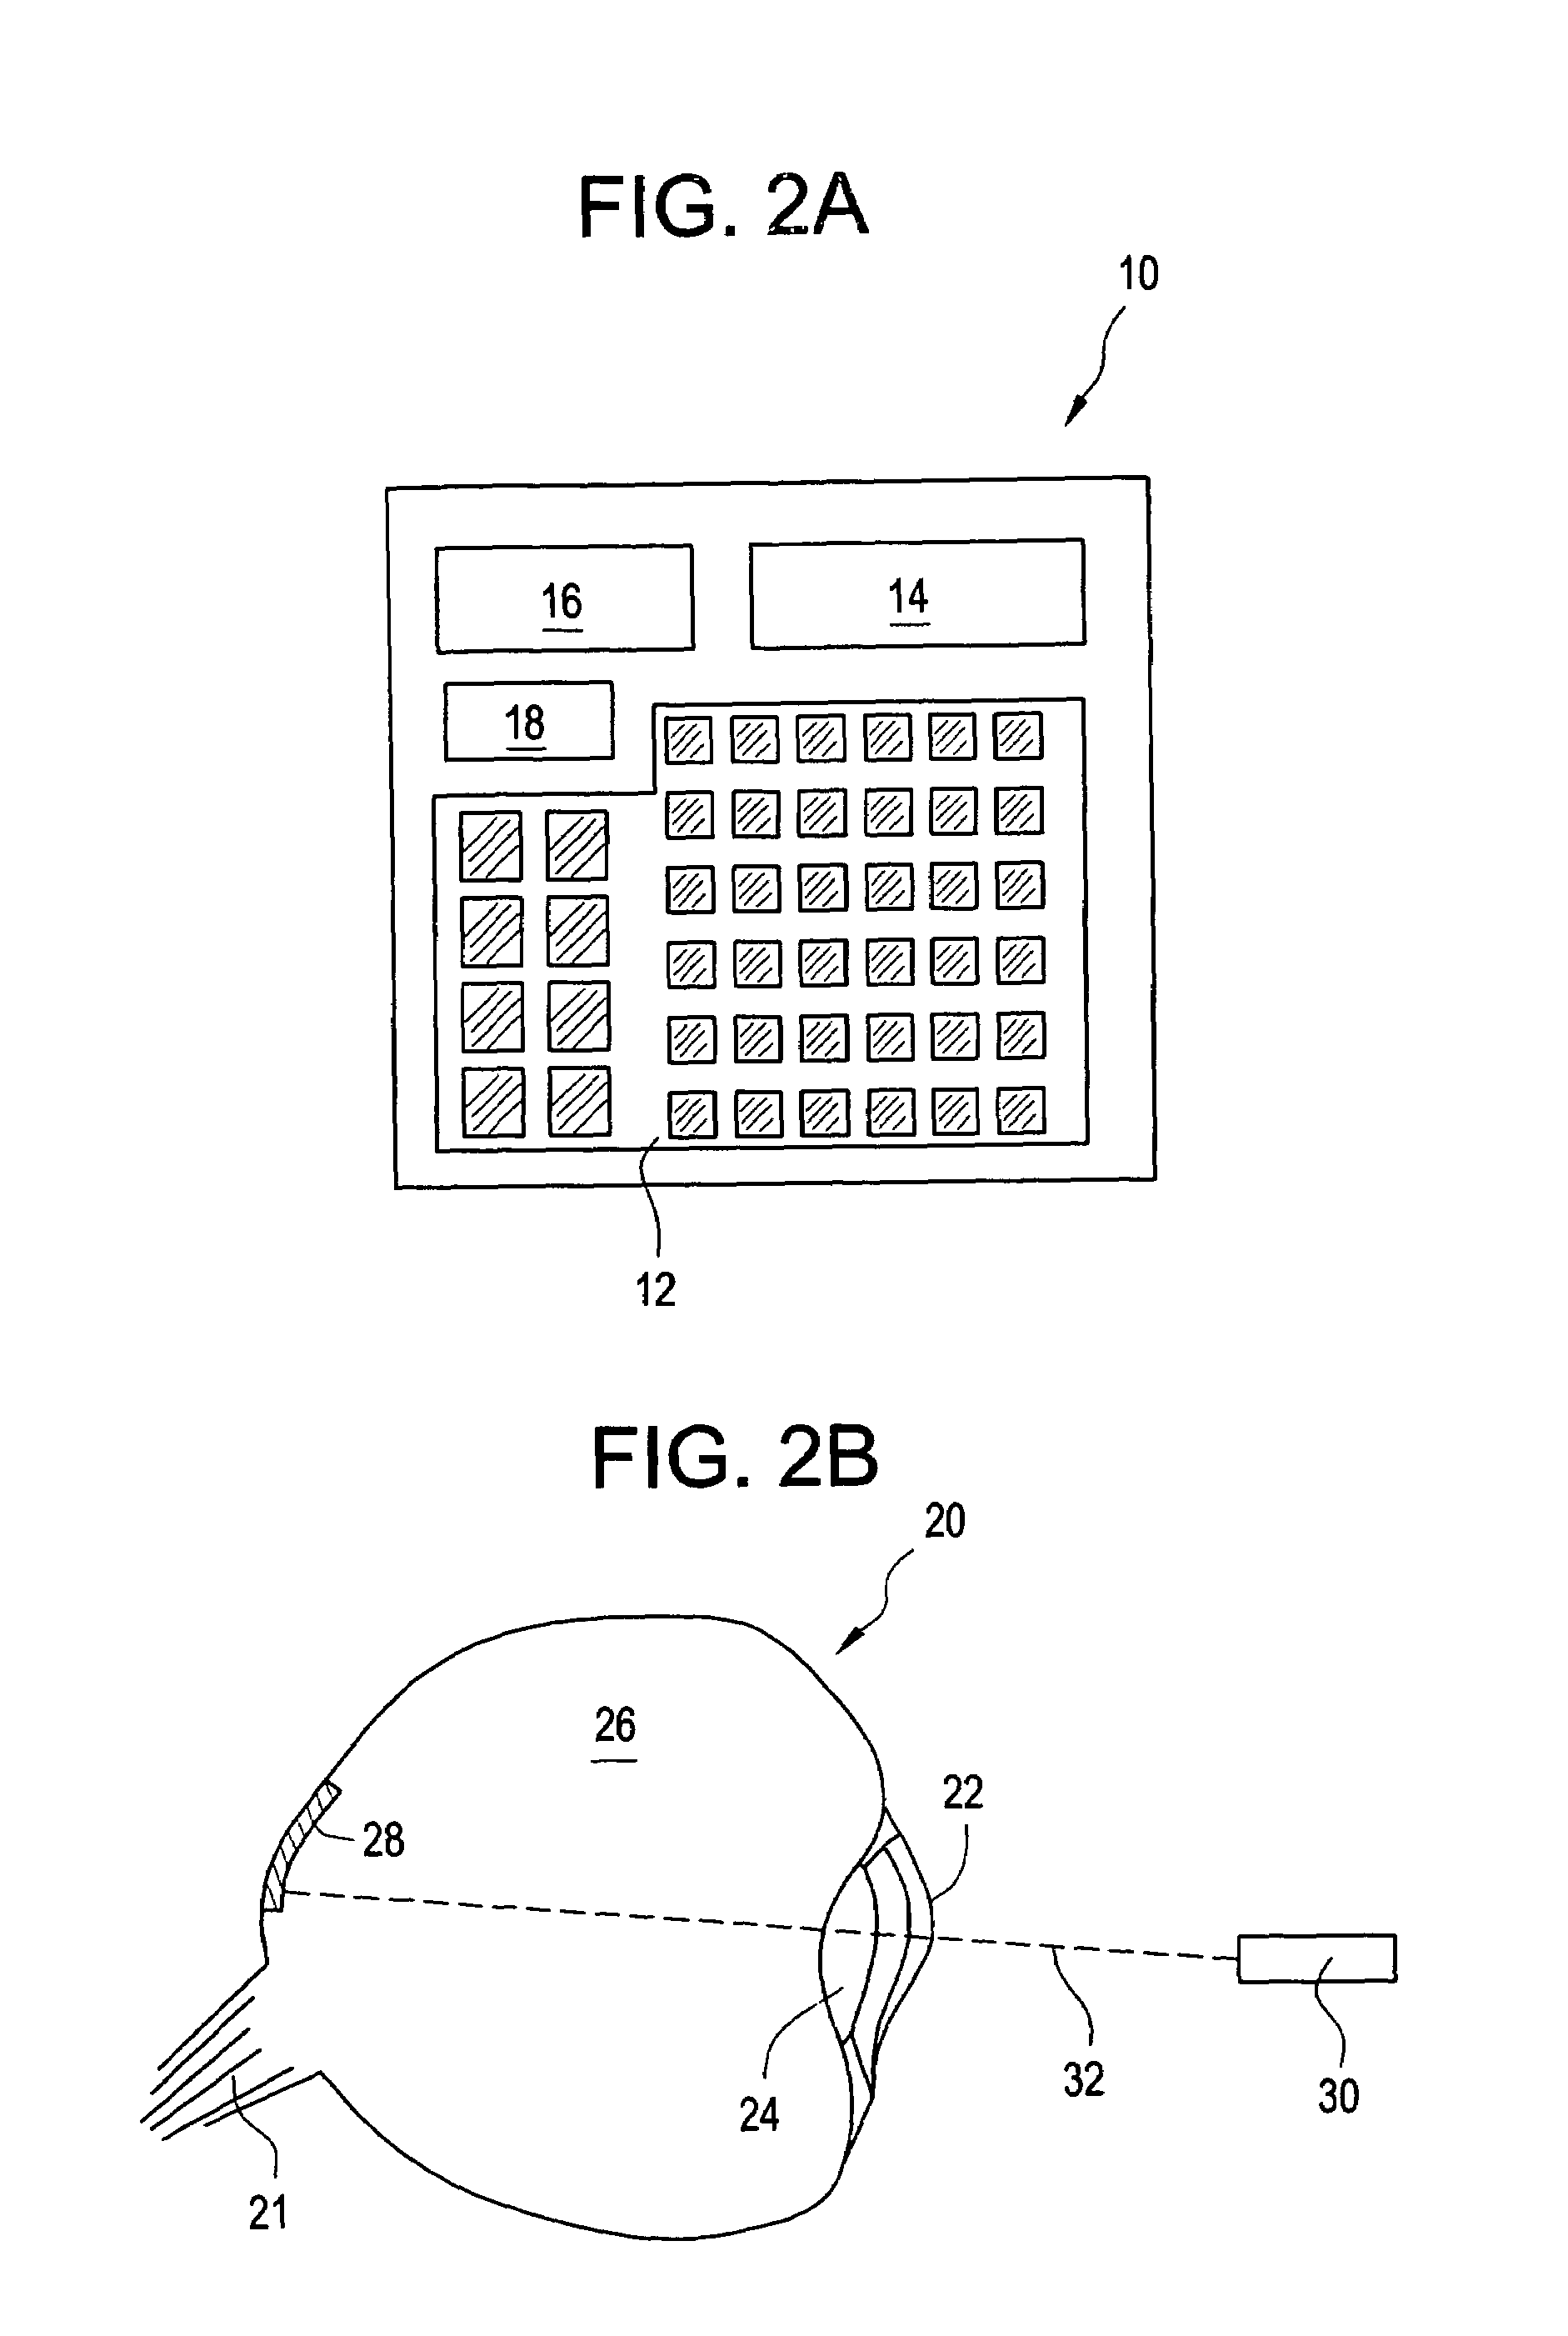 Microchip reservoir devices using wireless transmission of power and data